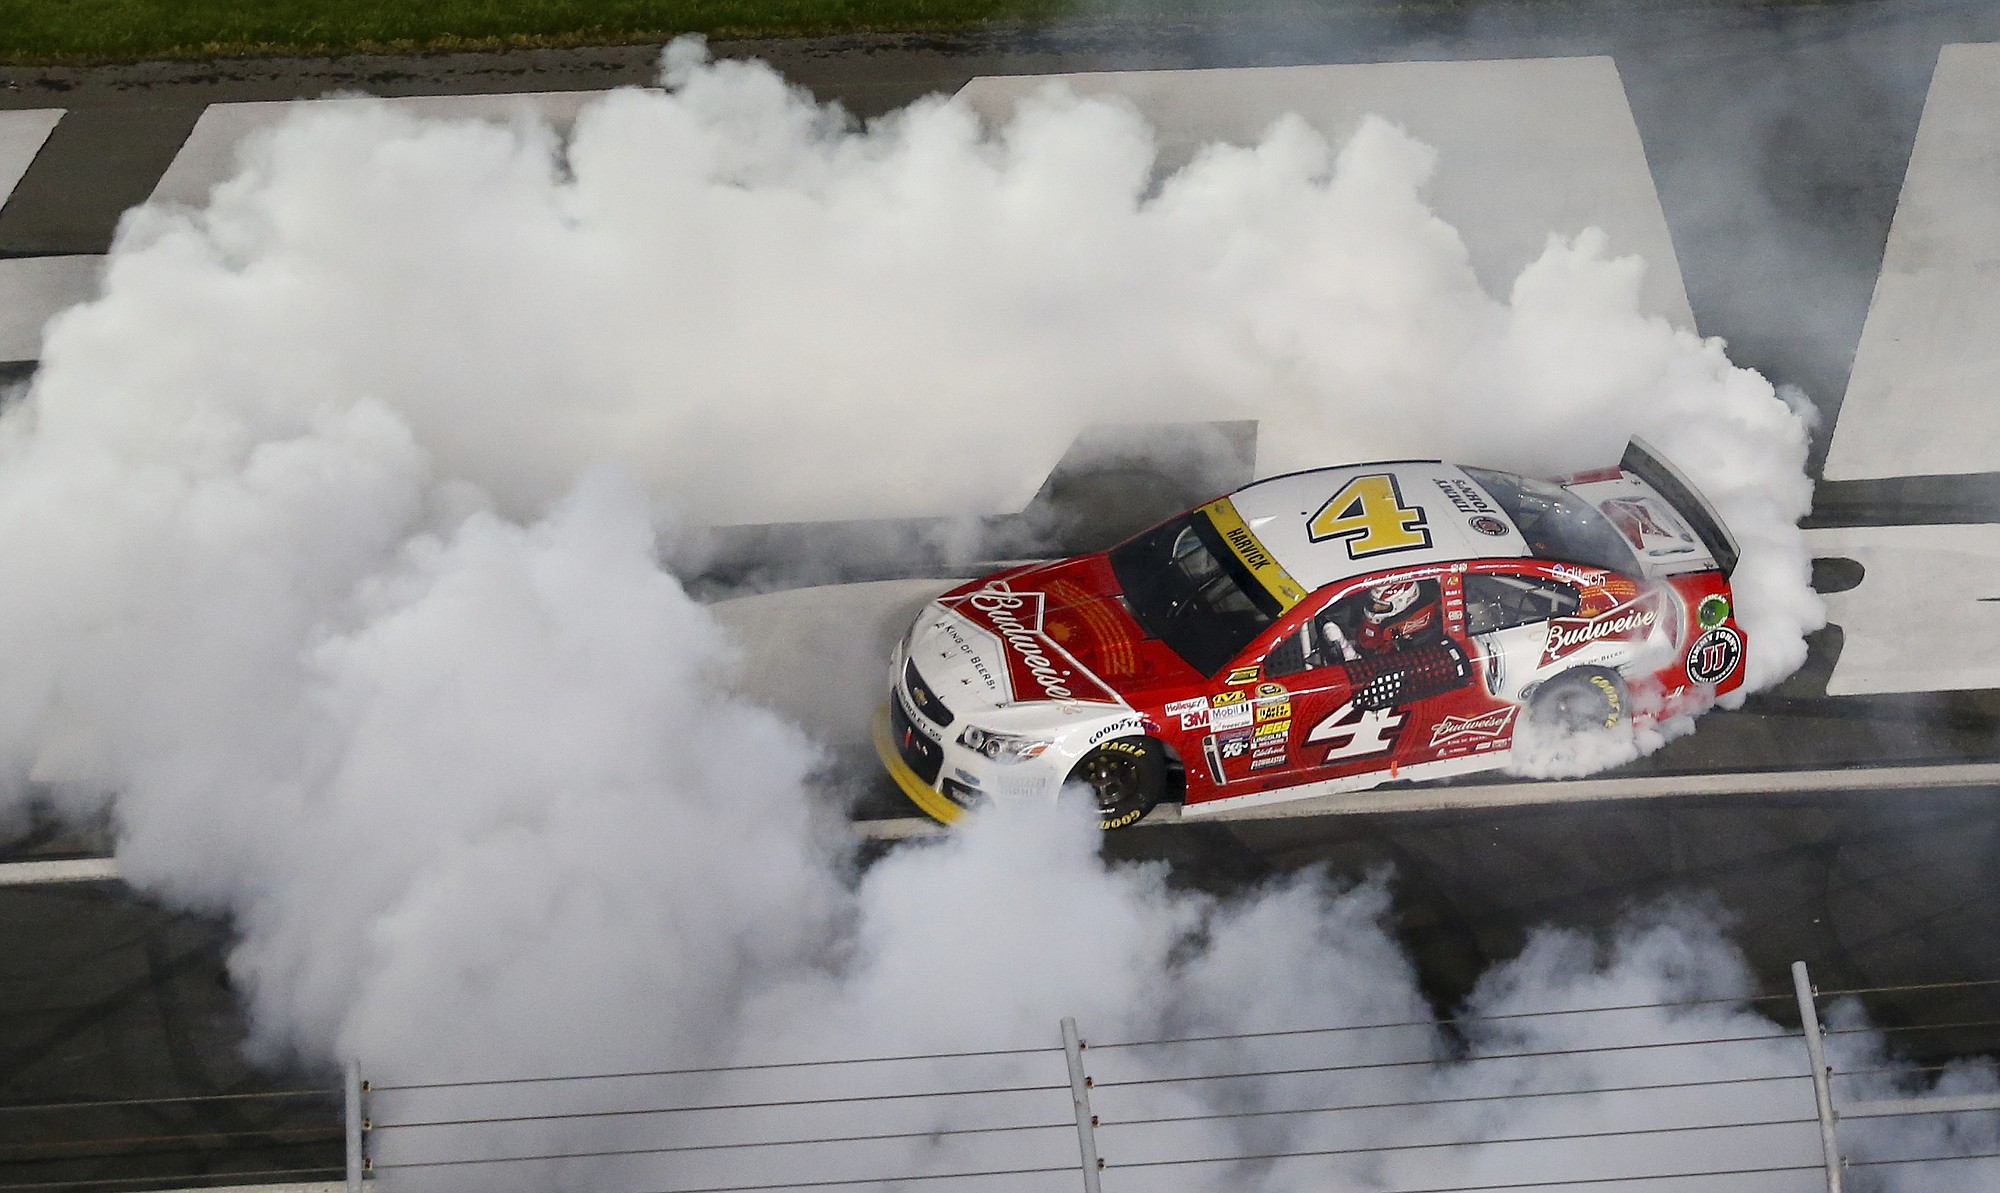 Kevin Harvick (4) burns out after winning the NASCAR Sprint Cup series Bank of America 500 auto race at Charlotte Motor Speedway in Concord, N.C., Saturday, Oct. 11, 2014.